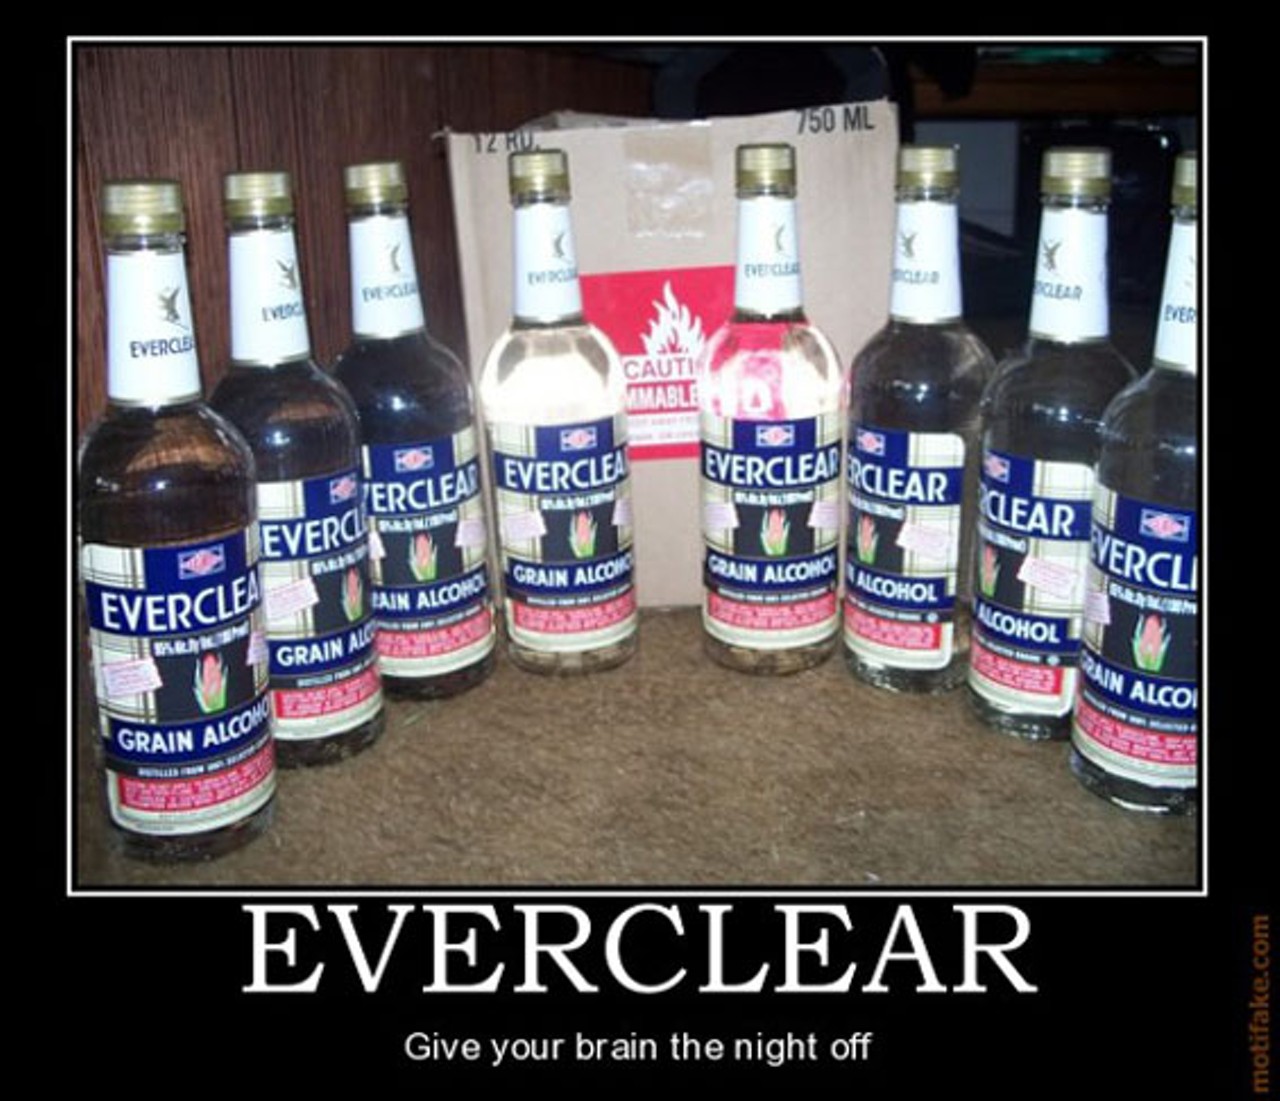 13. We are home to Luxco, maker of the "original" grain alcohol product, Everclear!